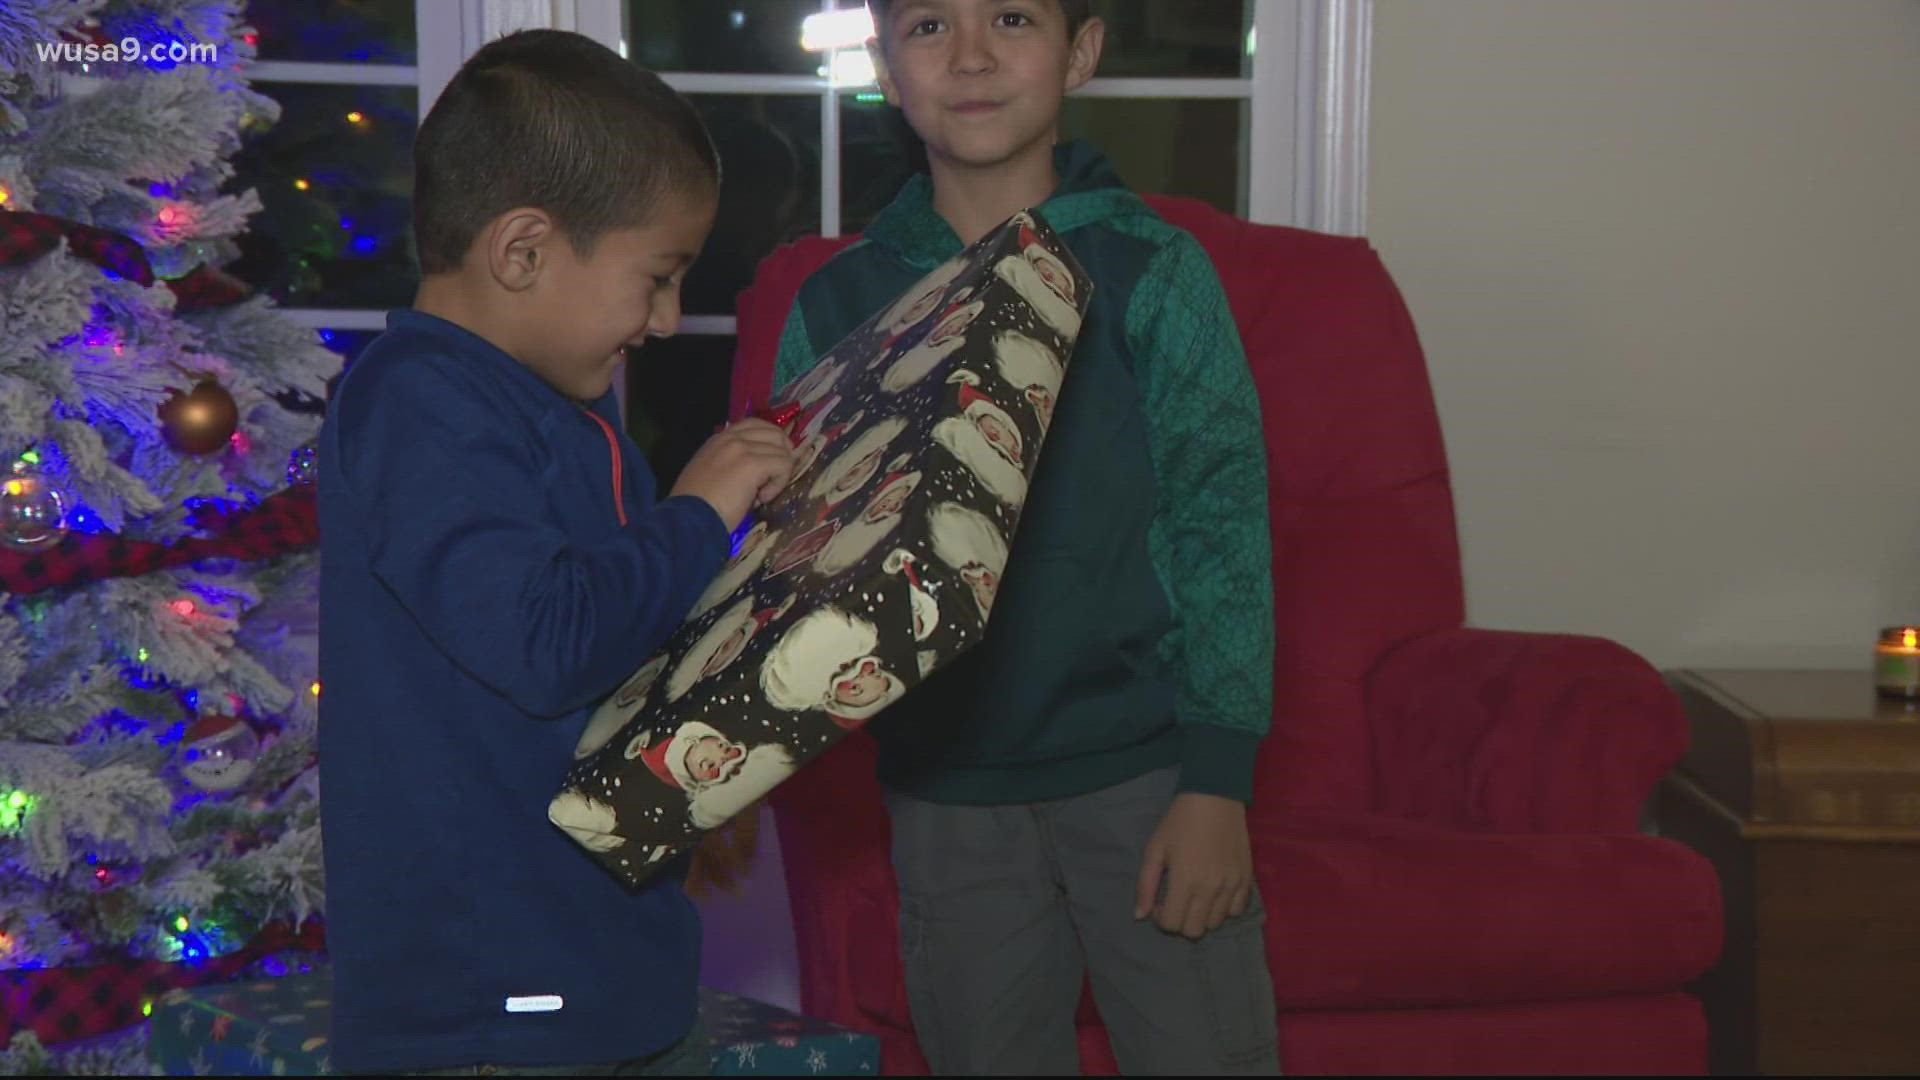 A DC nonprofit helps a family celebrate their very first Christmas in America.